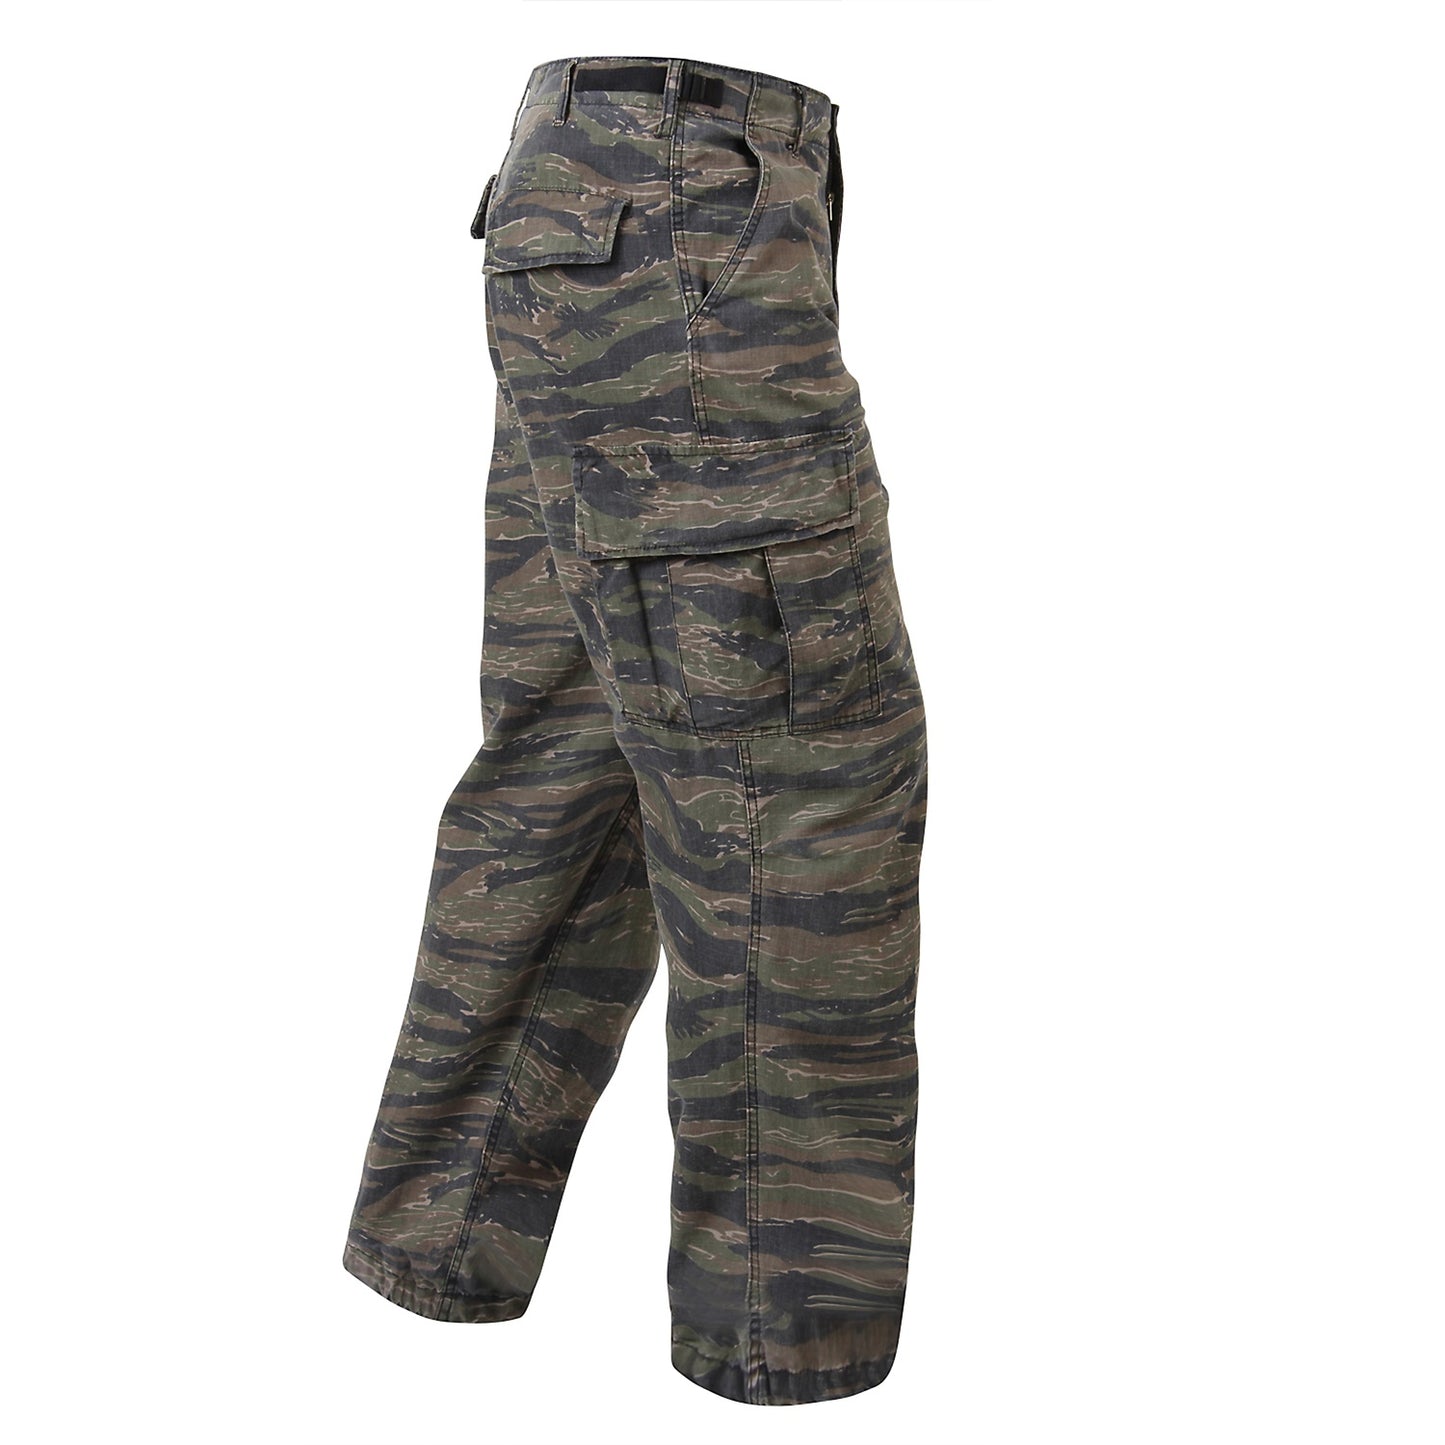 Rothco Vintage Vietnam Style Fatigues - Men's Rip-Stop Pants